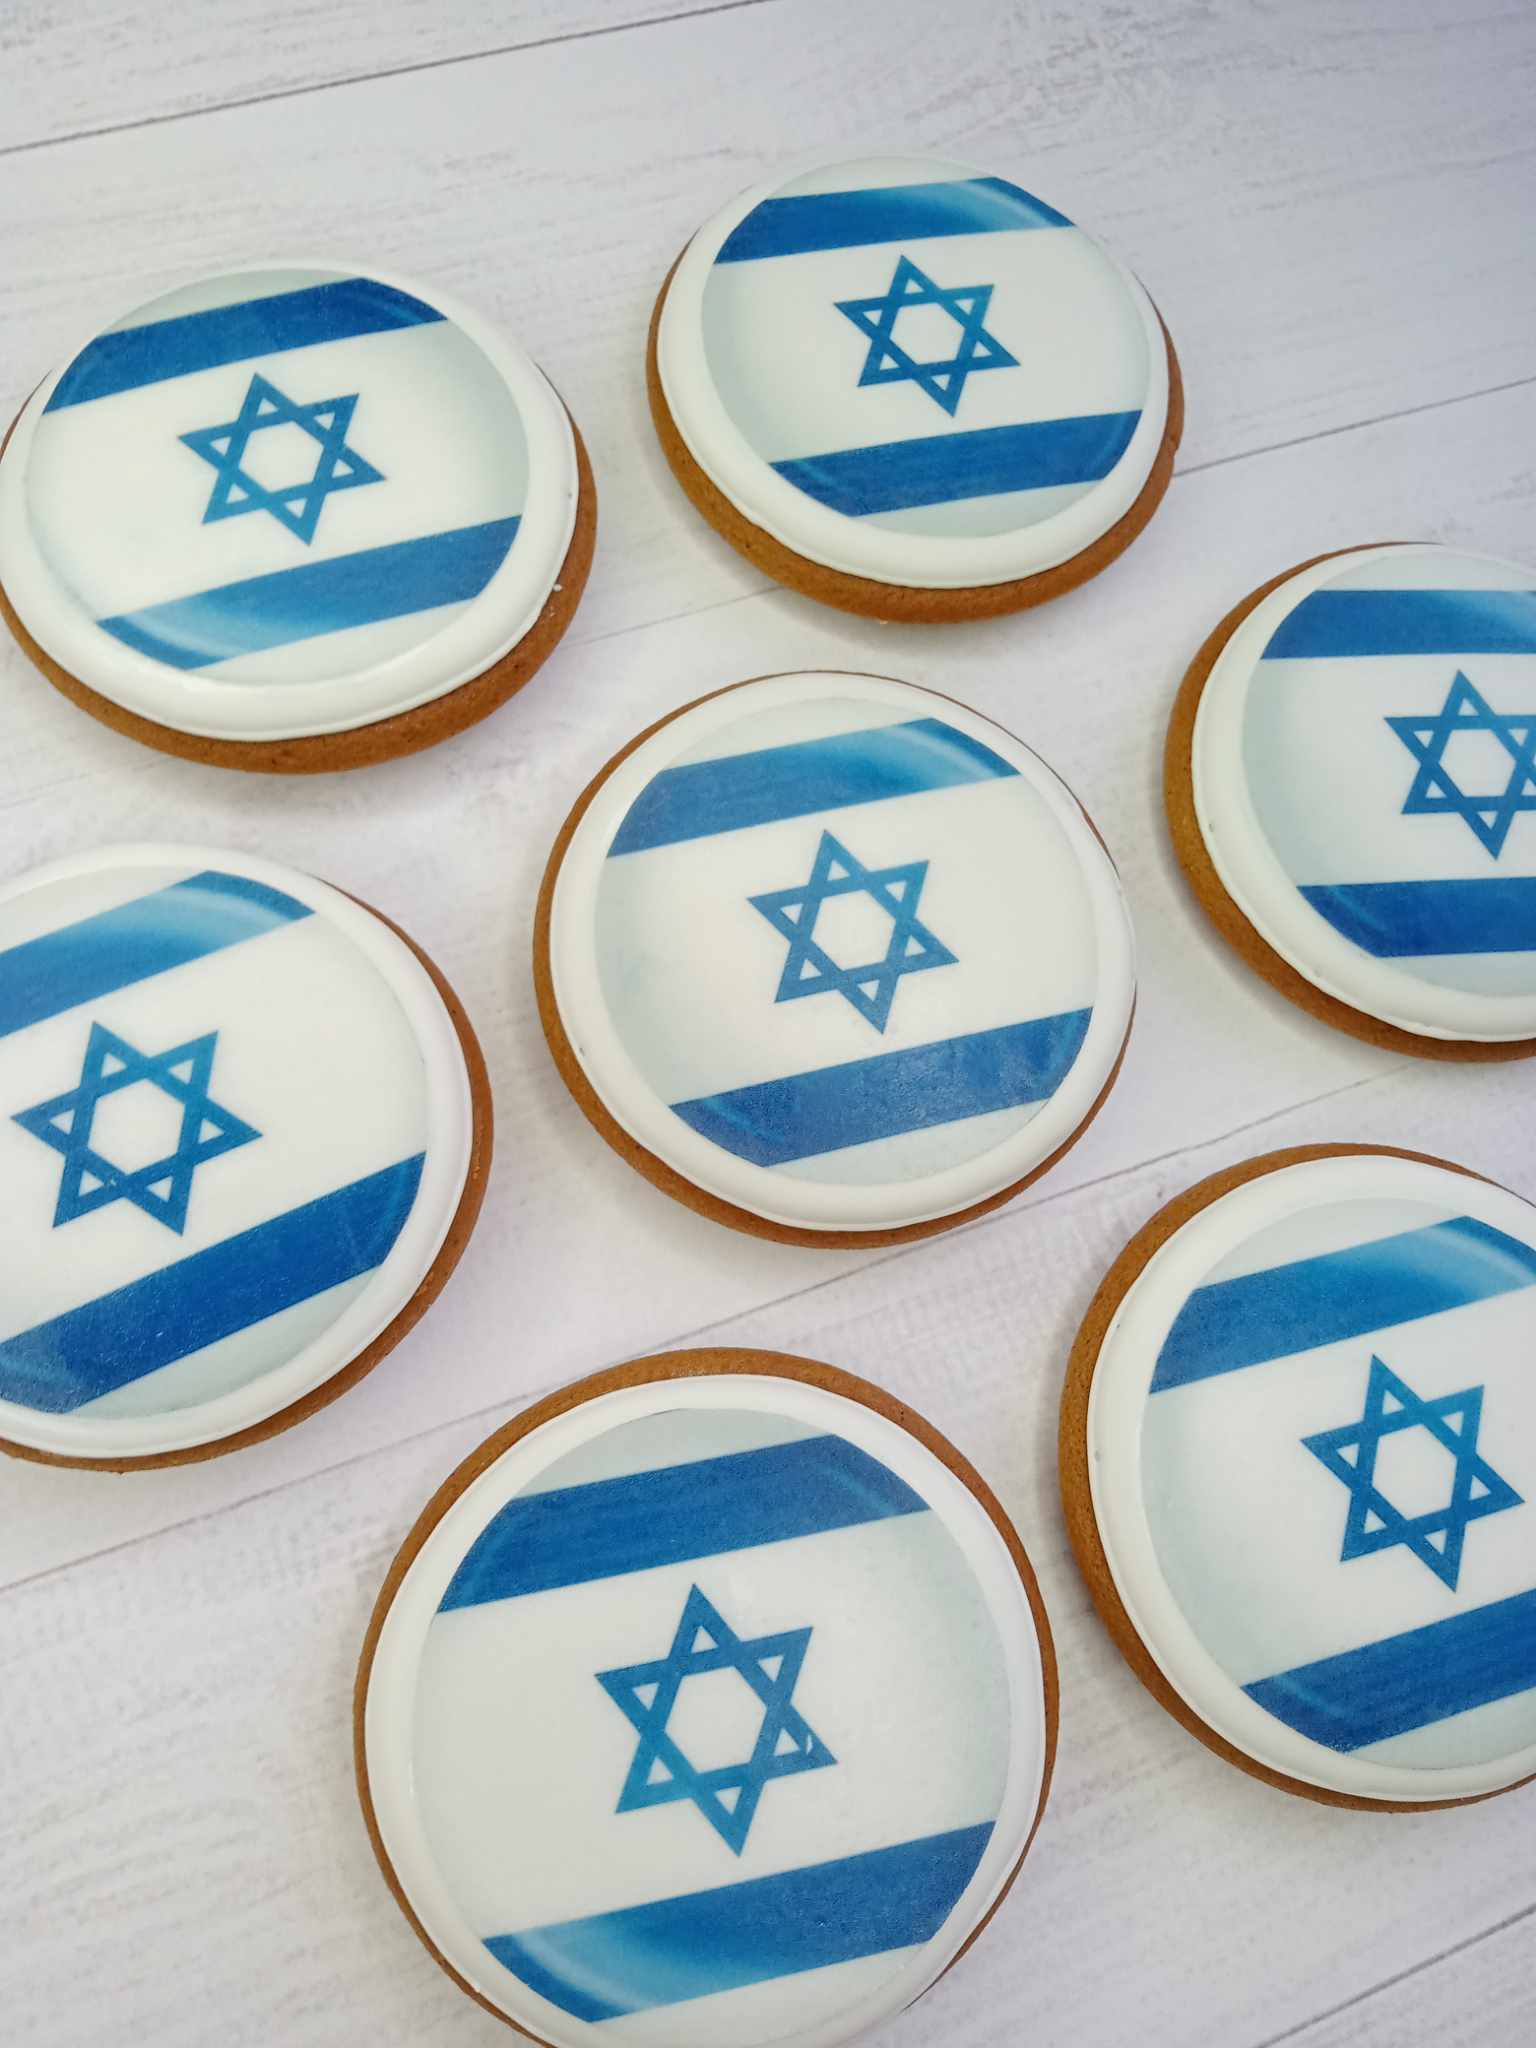 Mother's Day Bake Sale and Jewelry Exchange – Fundraiser for Israel and Ukraine